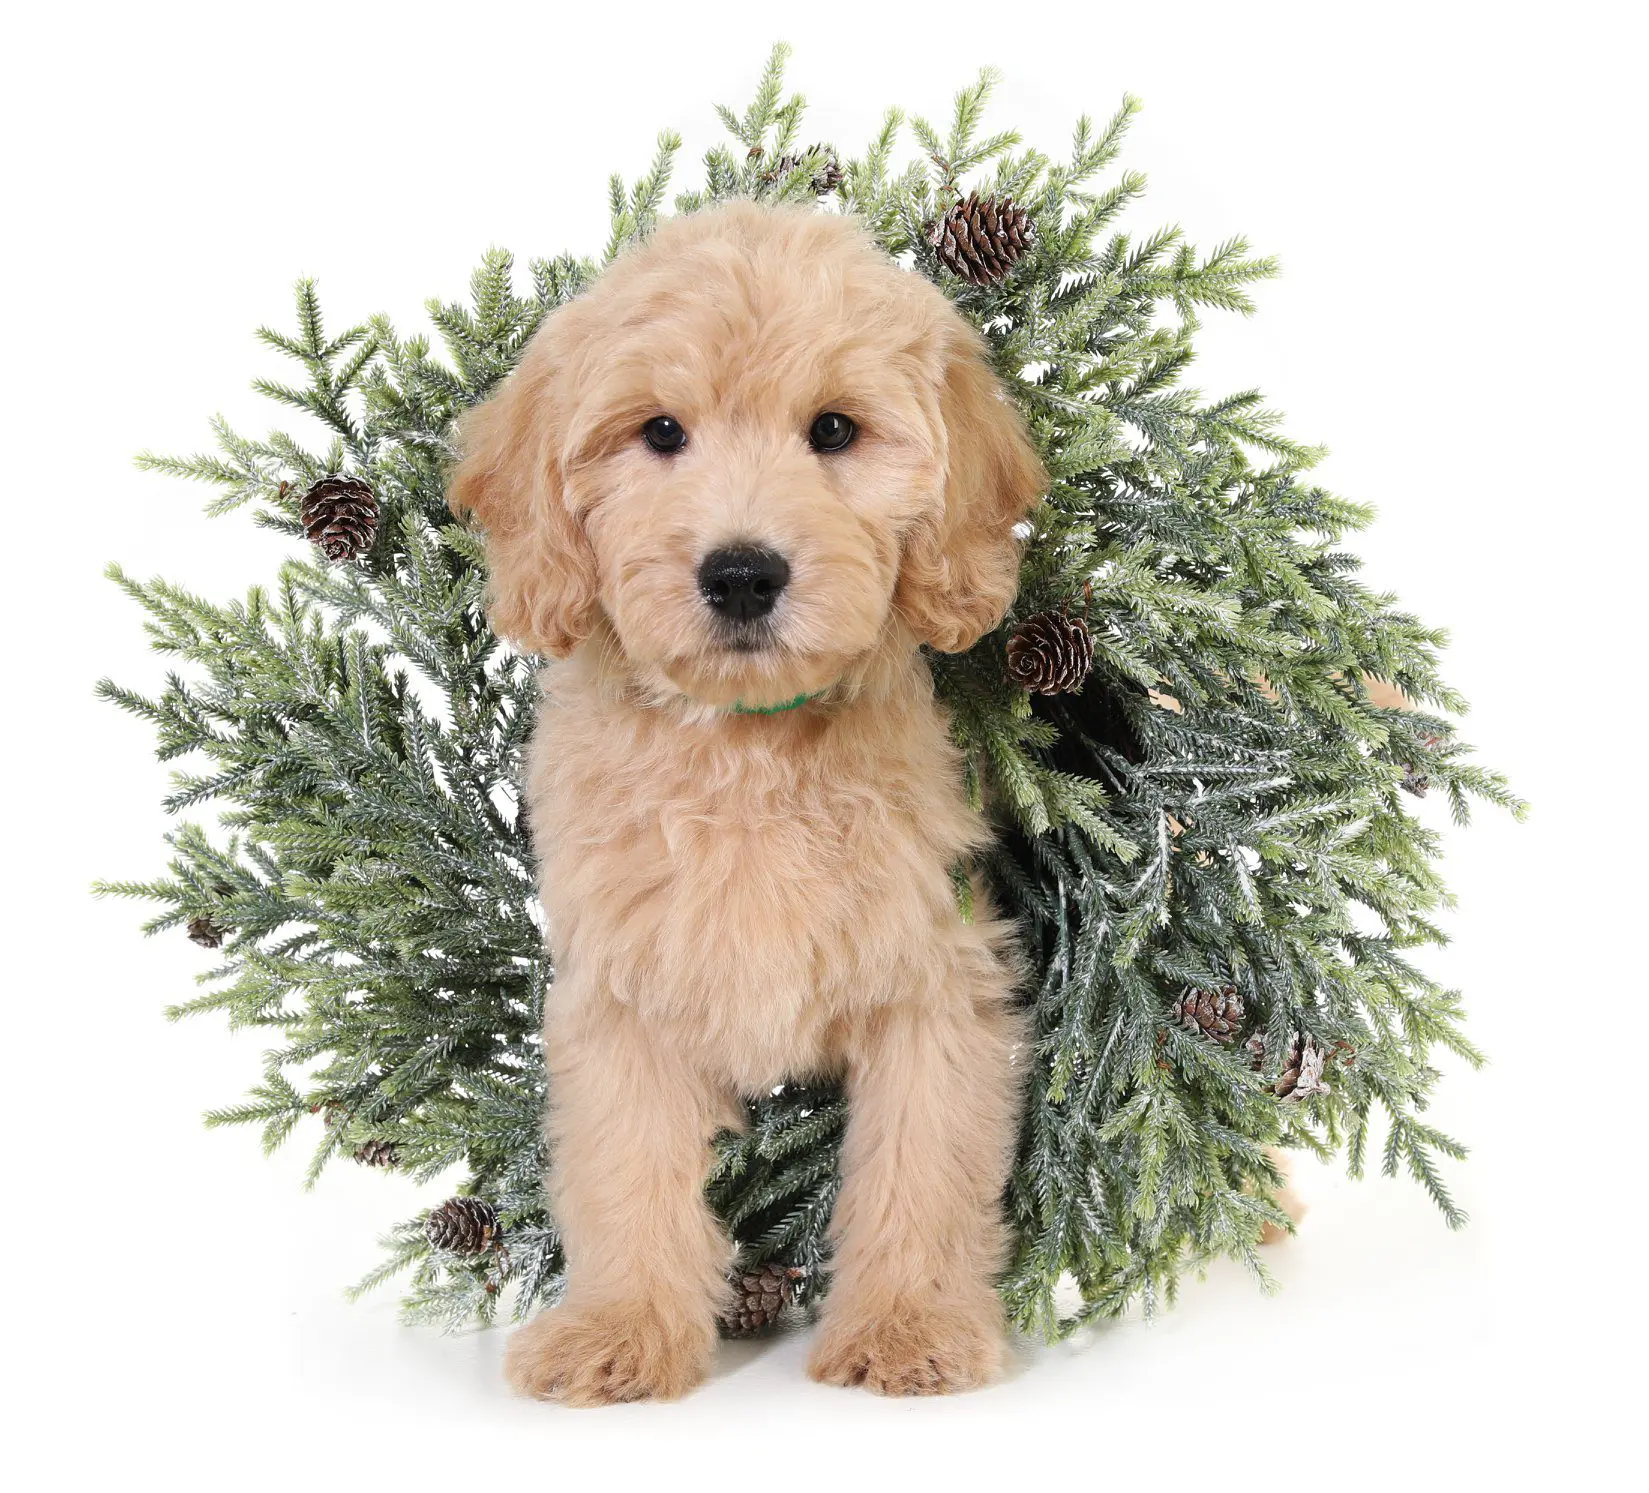 goldendoodle puppy with Christmas wreath